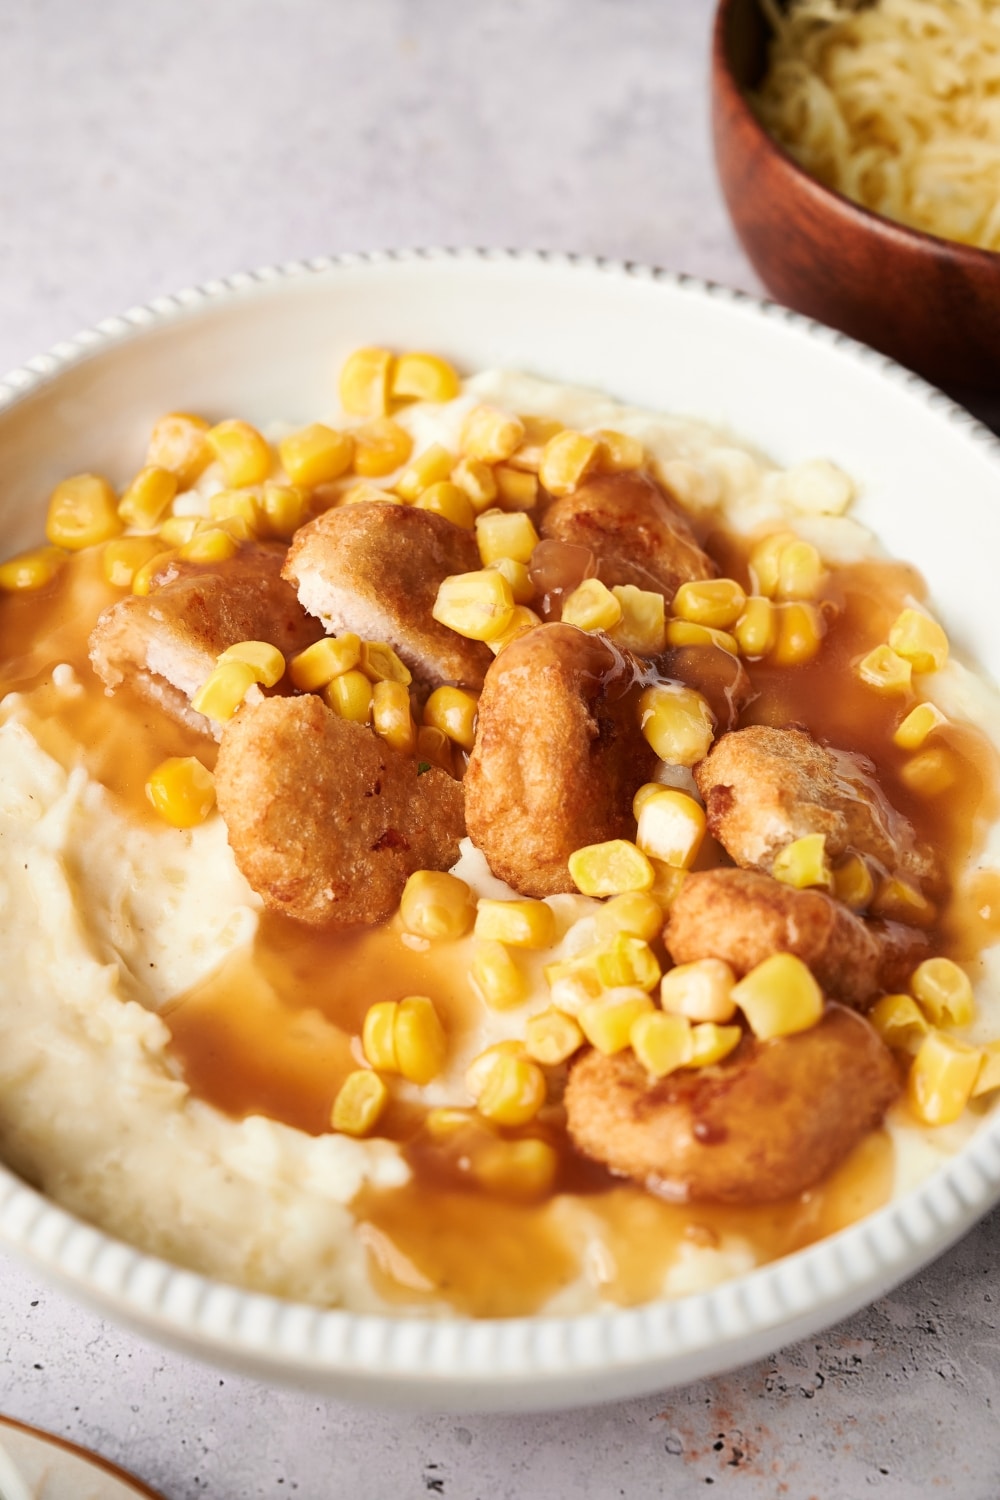 A KFC bowl filled with mashed potatoes, chicken nuggets, corn kernels, and brown gravy.